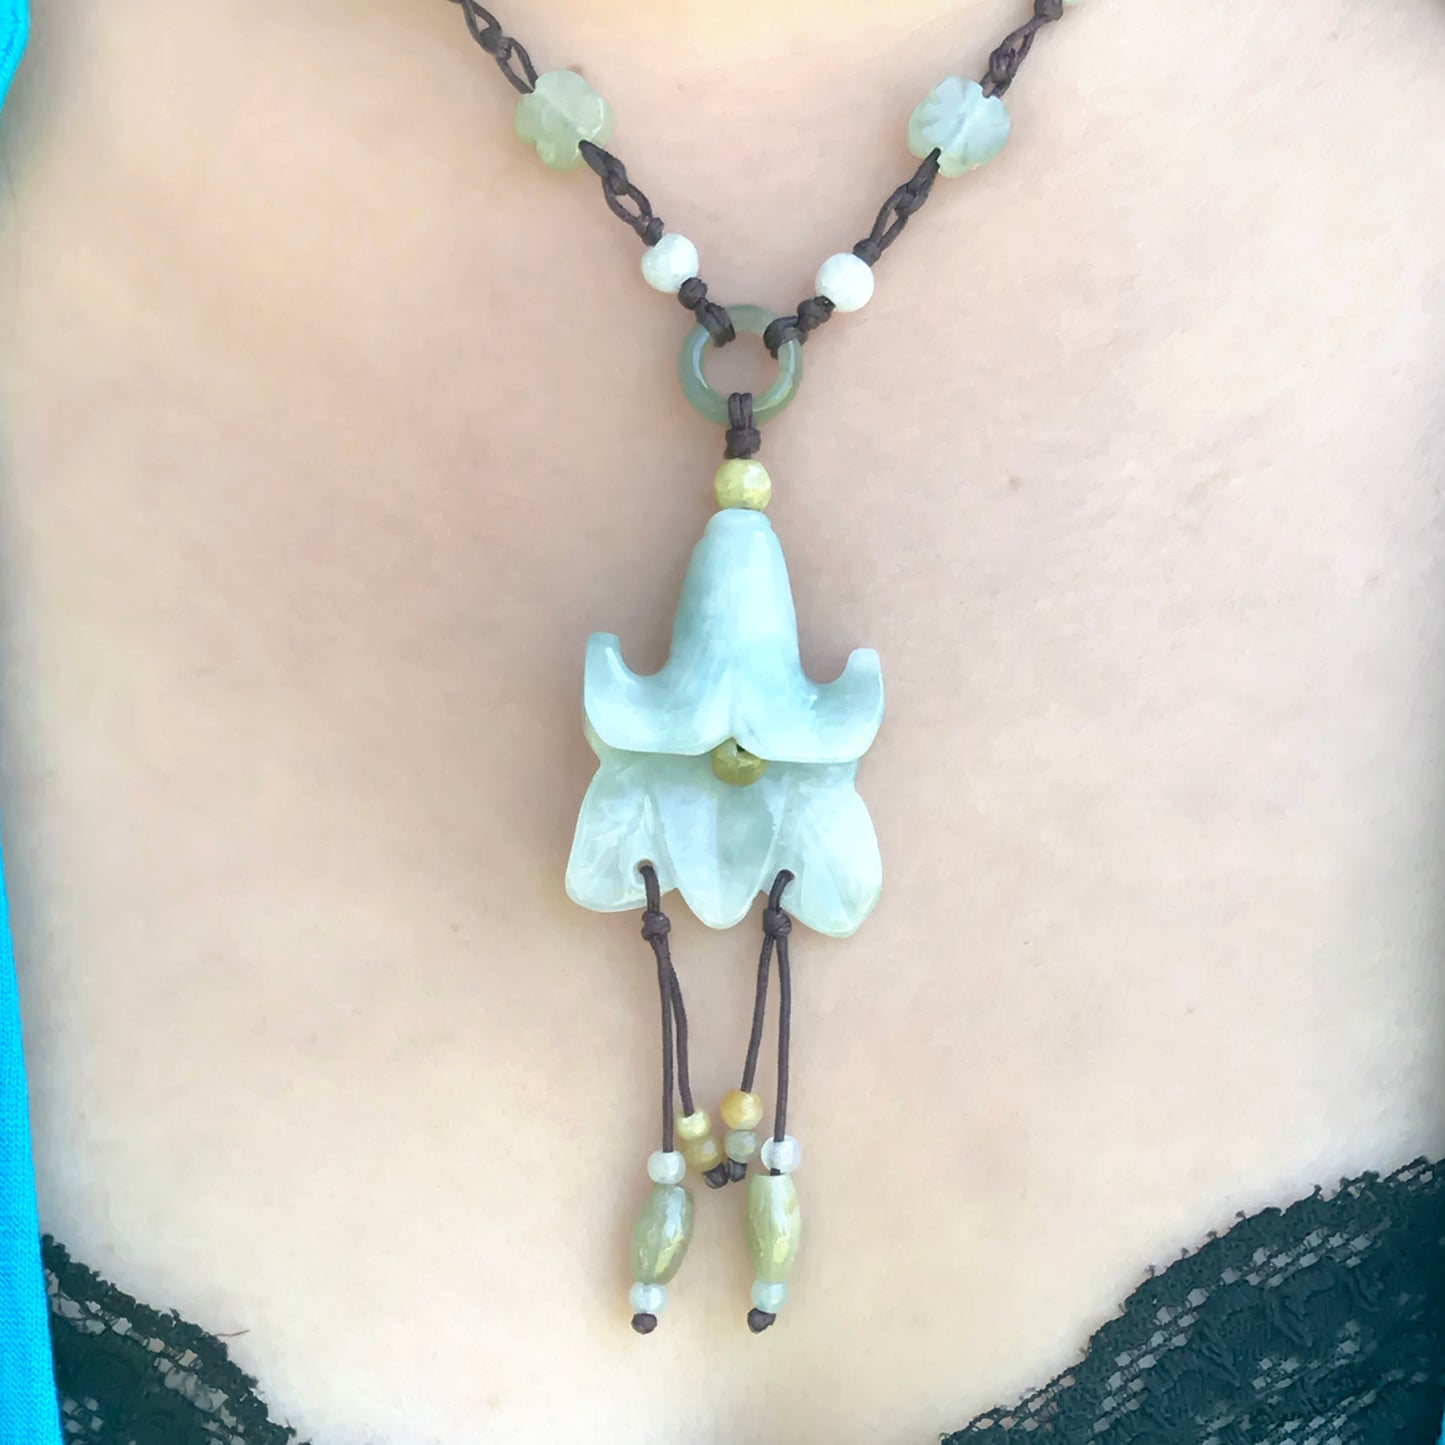 Get Noticed with the Bellflower Jade Necklace Pendant